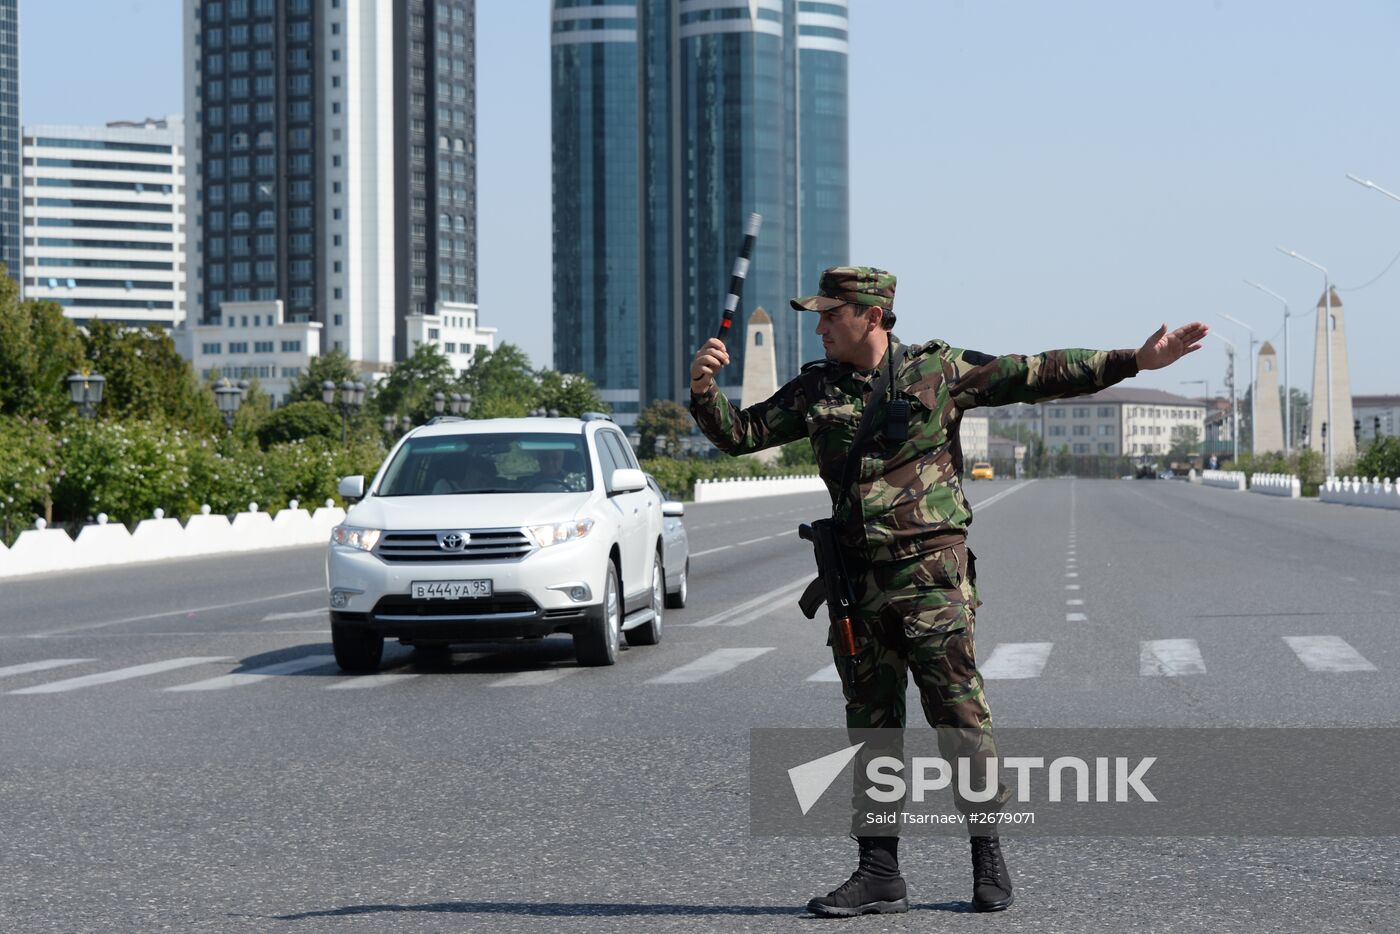 Chechen Ministry of Interior toughens traffic control